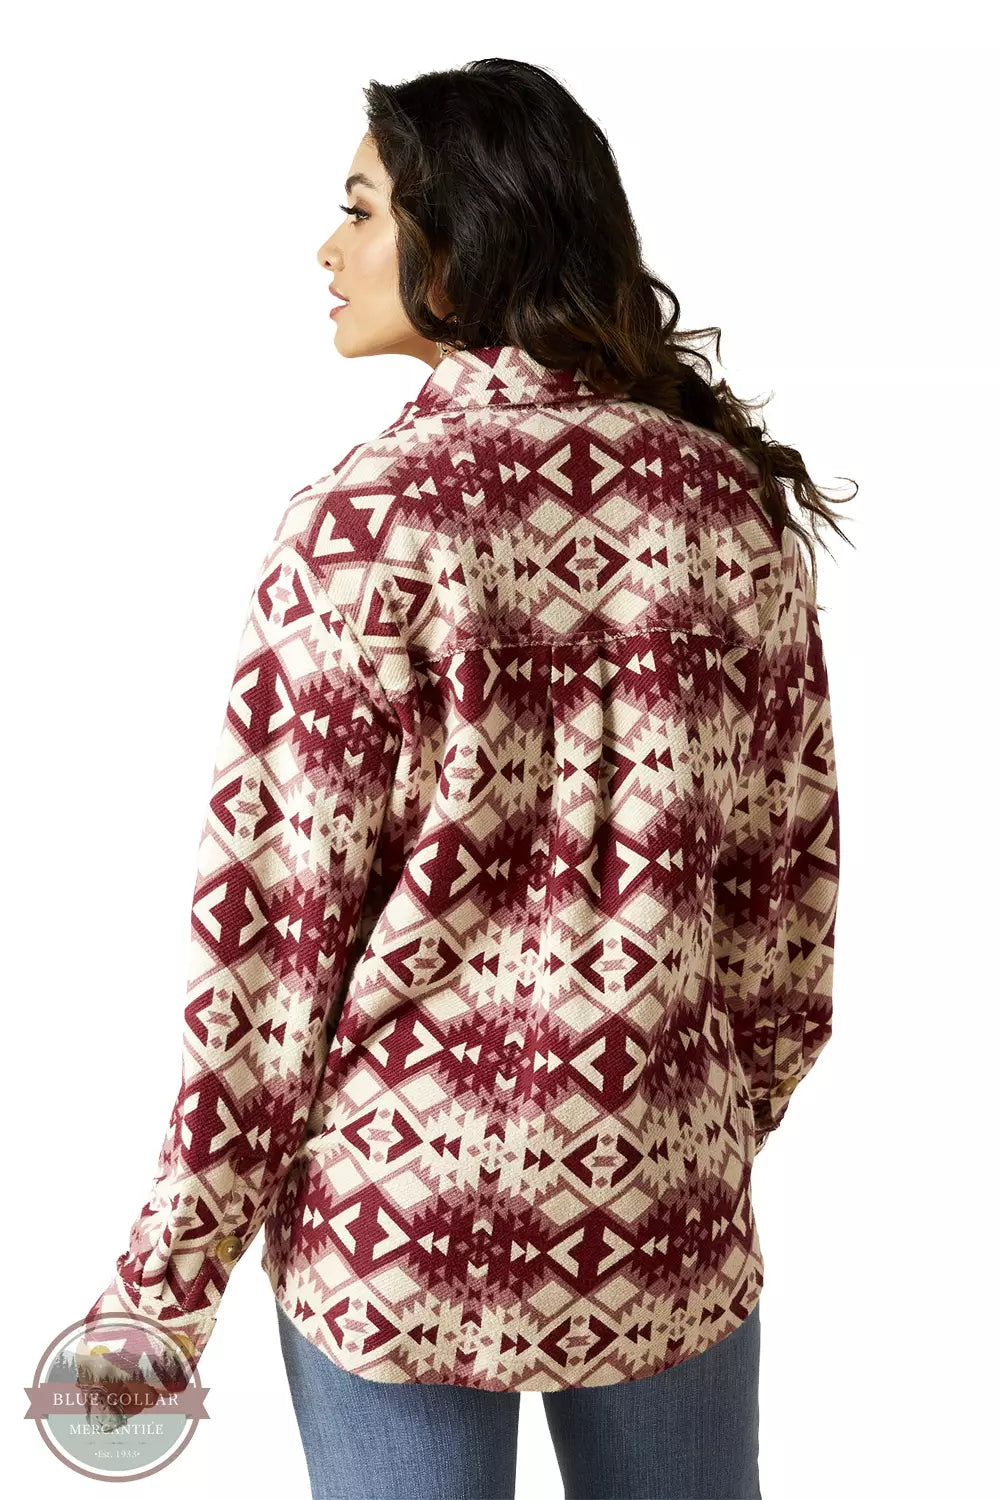 Ariat 10046274 Fillmore Shirt Jacket in a Southwest Print Back View